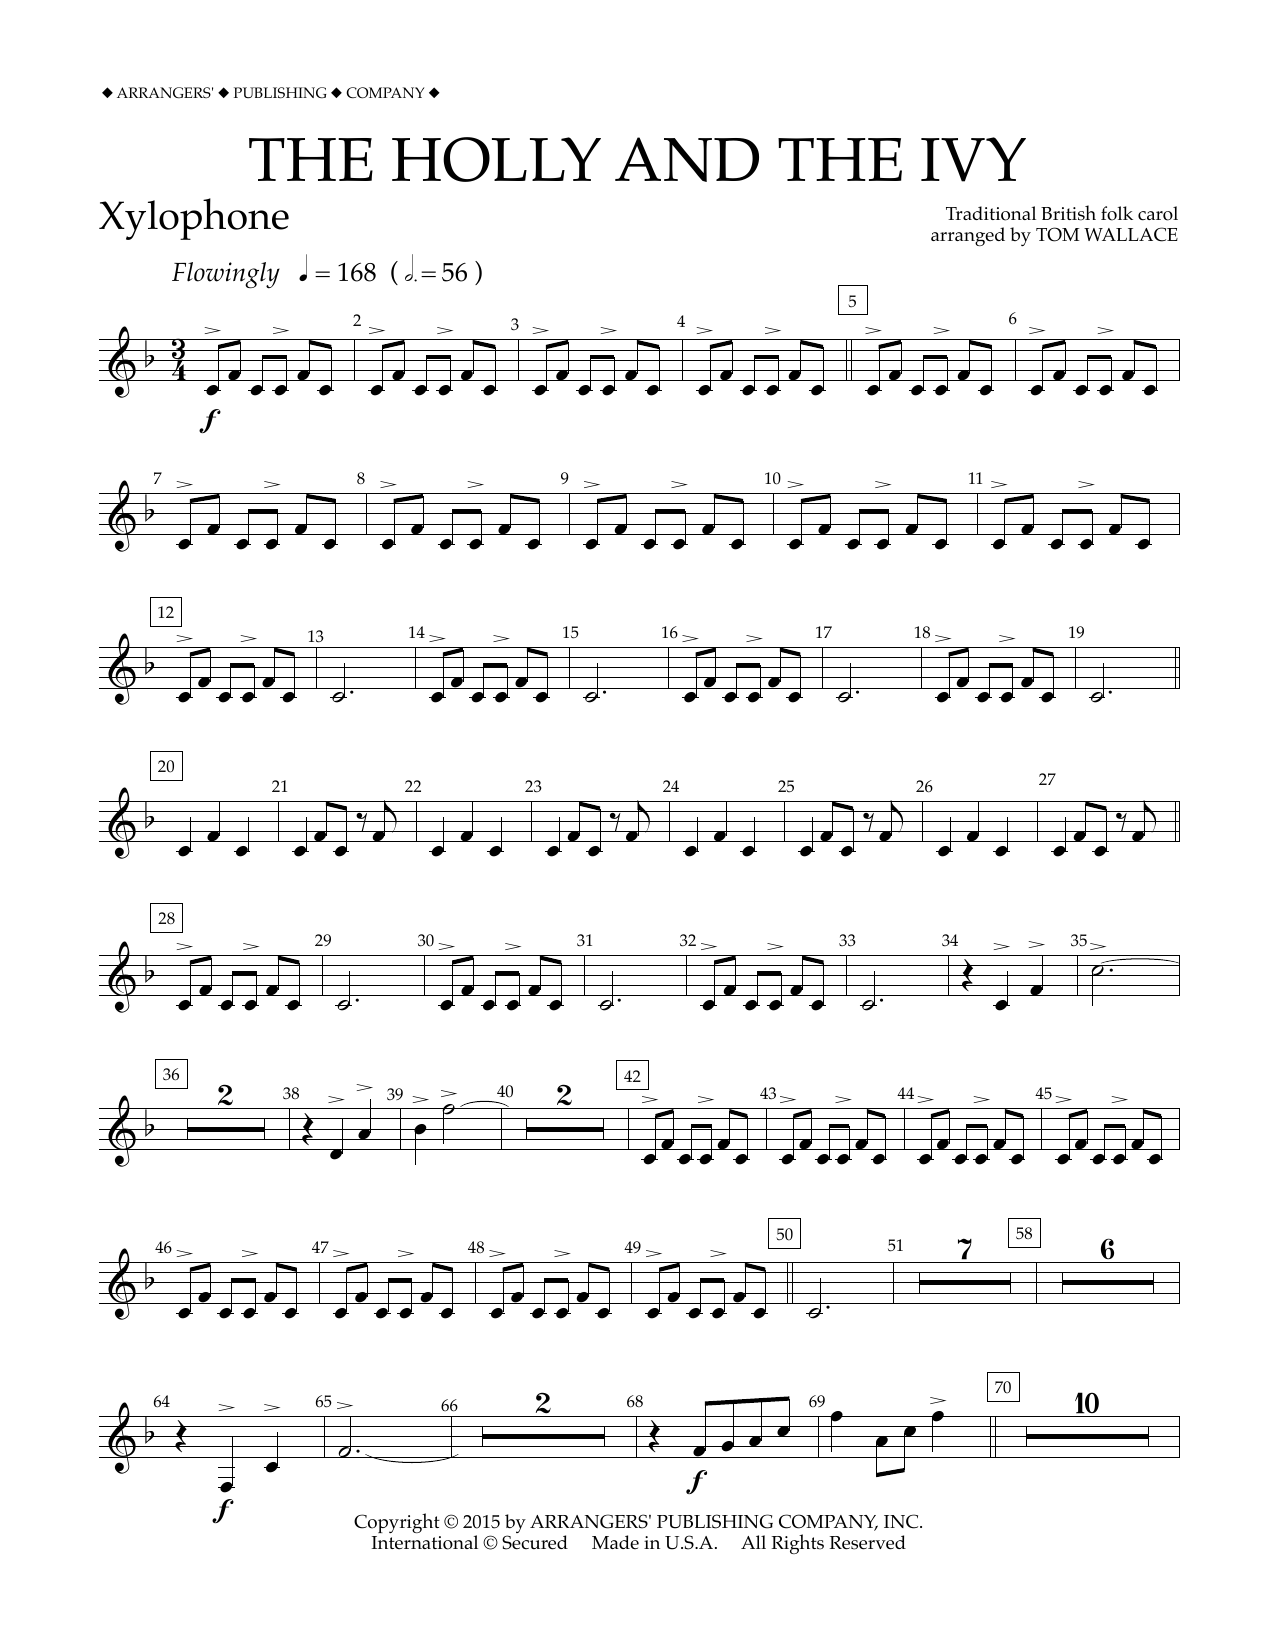 Download Tom Wallace The Holly and the Ivy - Xylophone Sheet Music